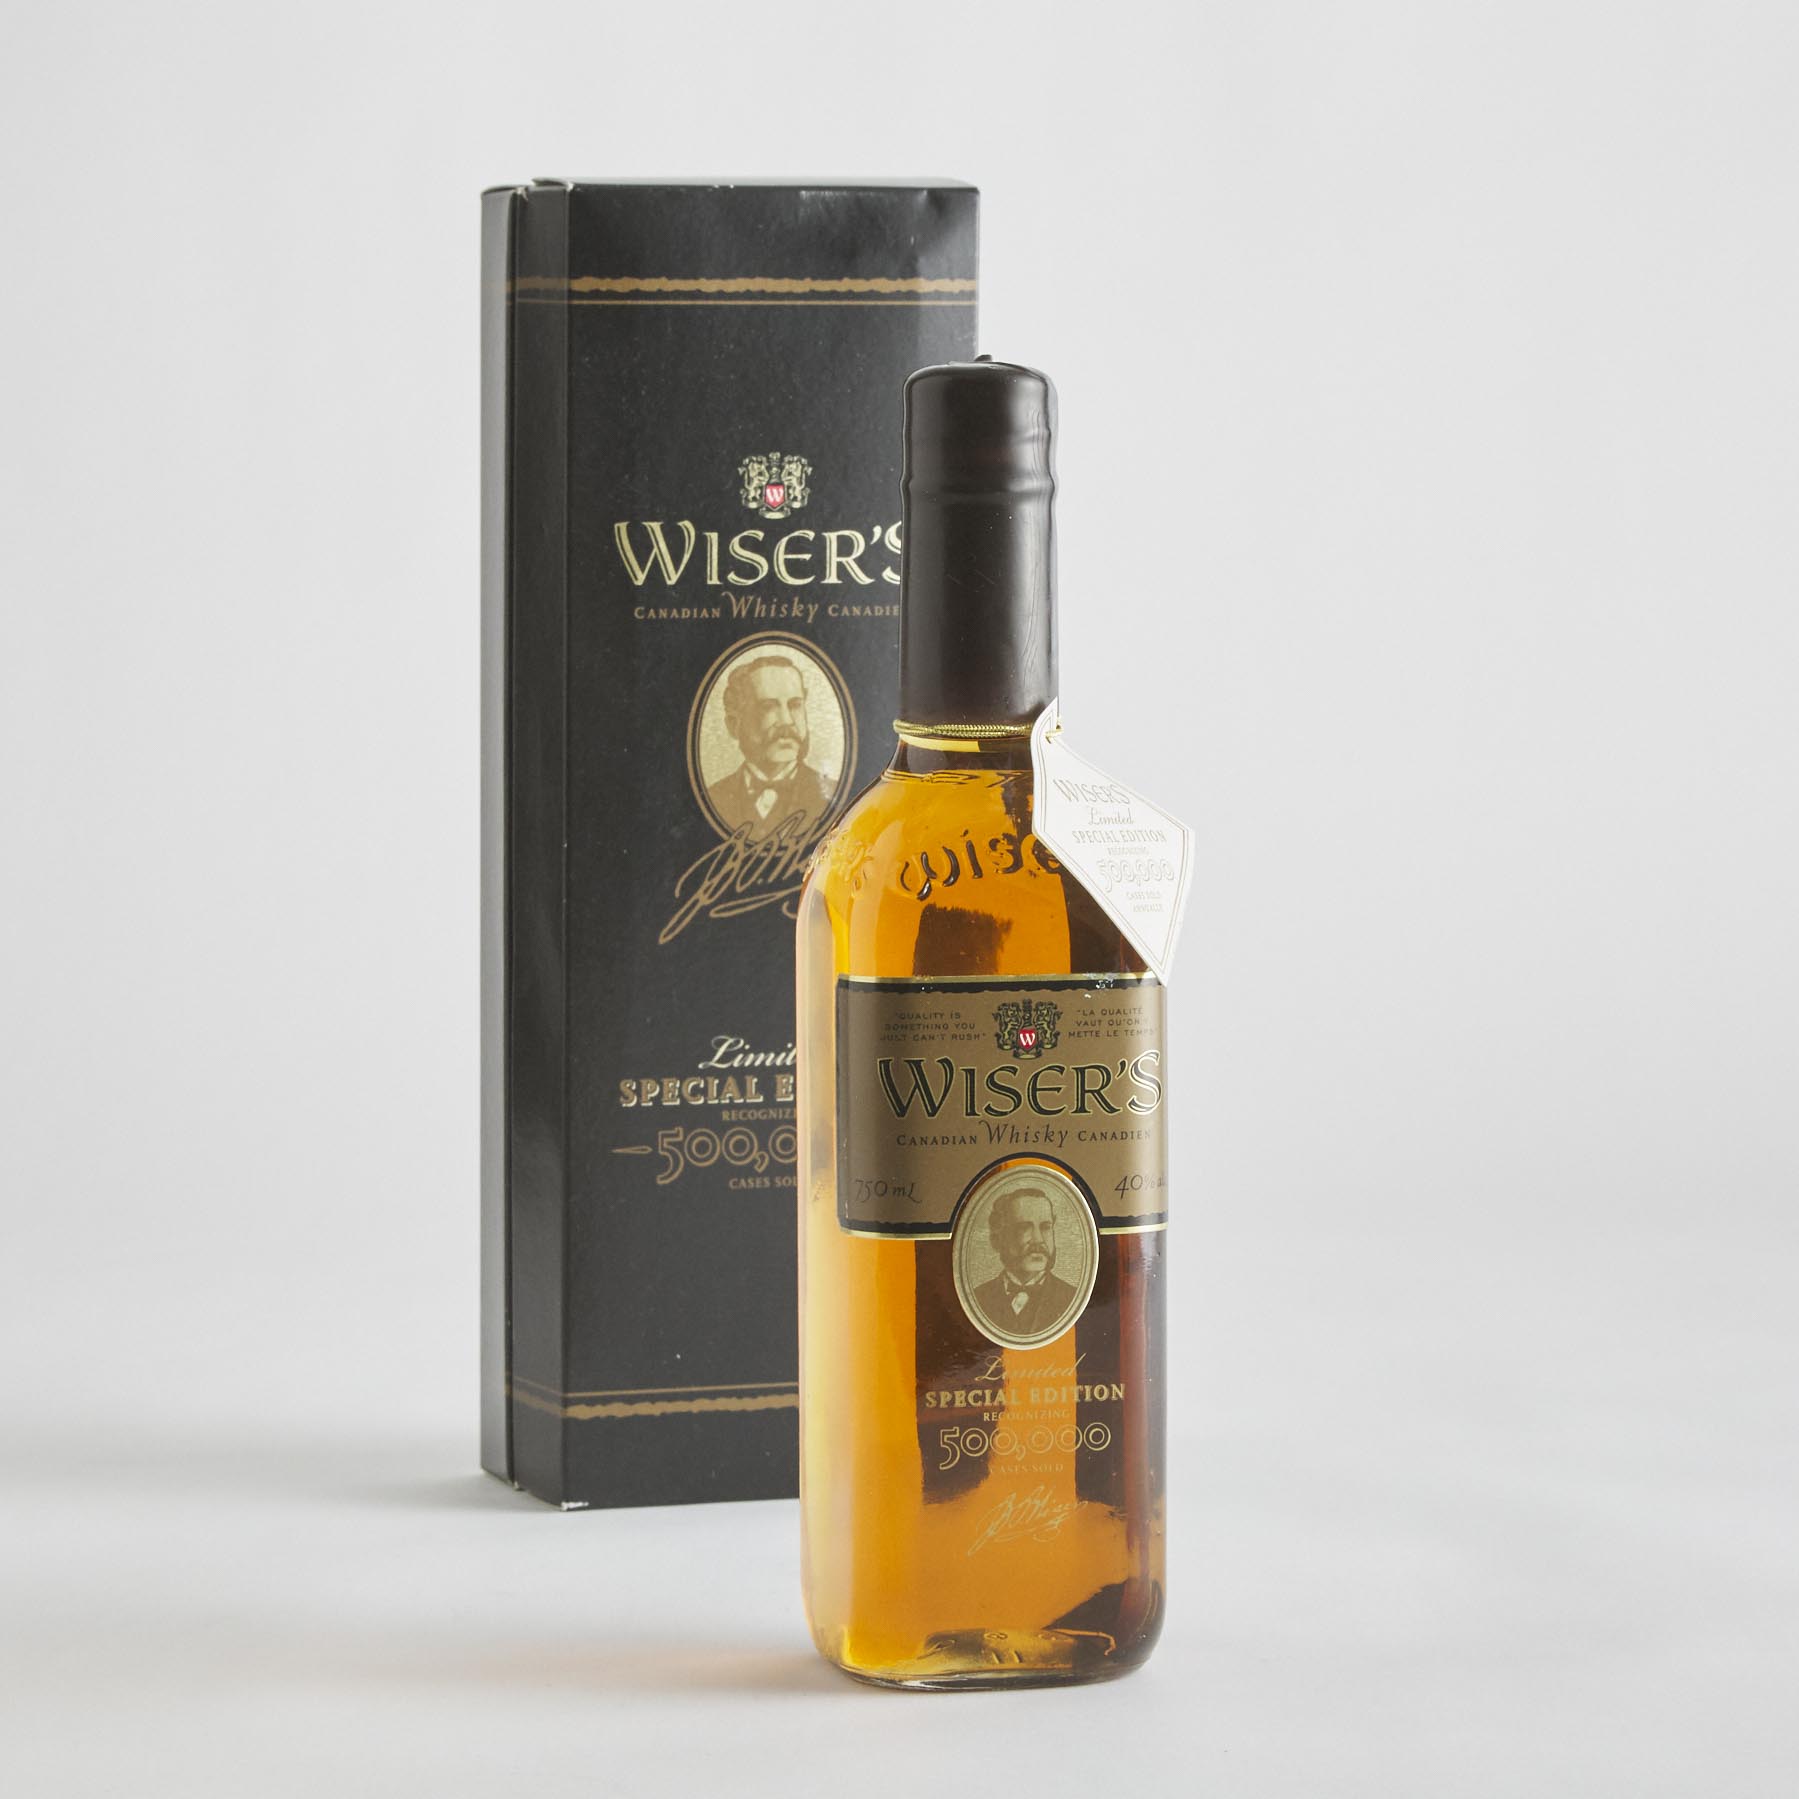 WISER'S CANADIAN WHISKY (ONE 750 ML)